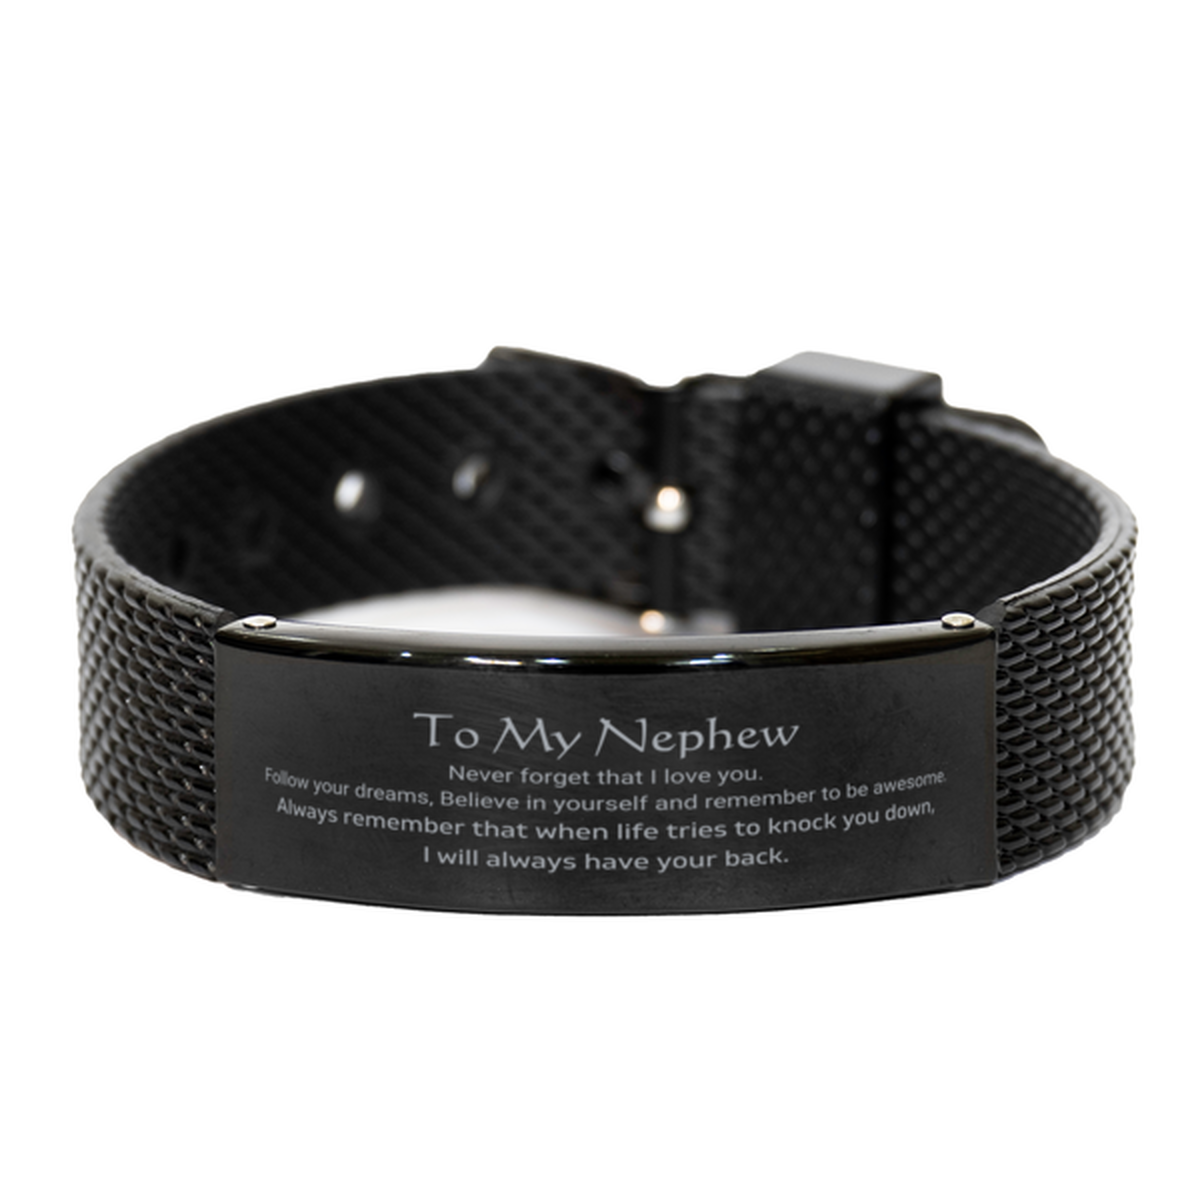 Inspirational Gifts for Nephew, Follow your dreams, Believe in yourself, Nephew Black Shark Mesh Bracelet, Birthday Christmas Unique Gifts For Nephew